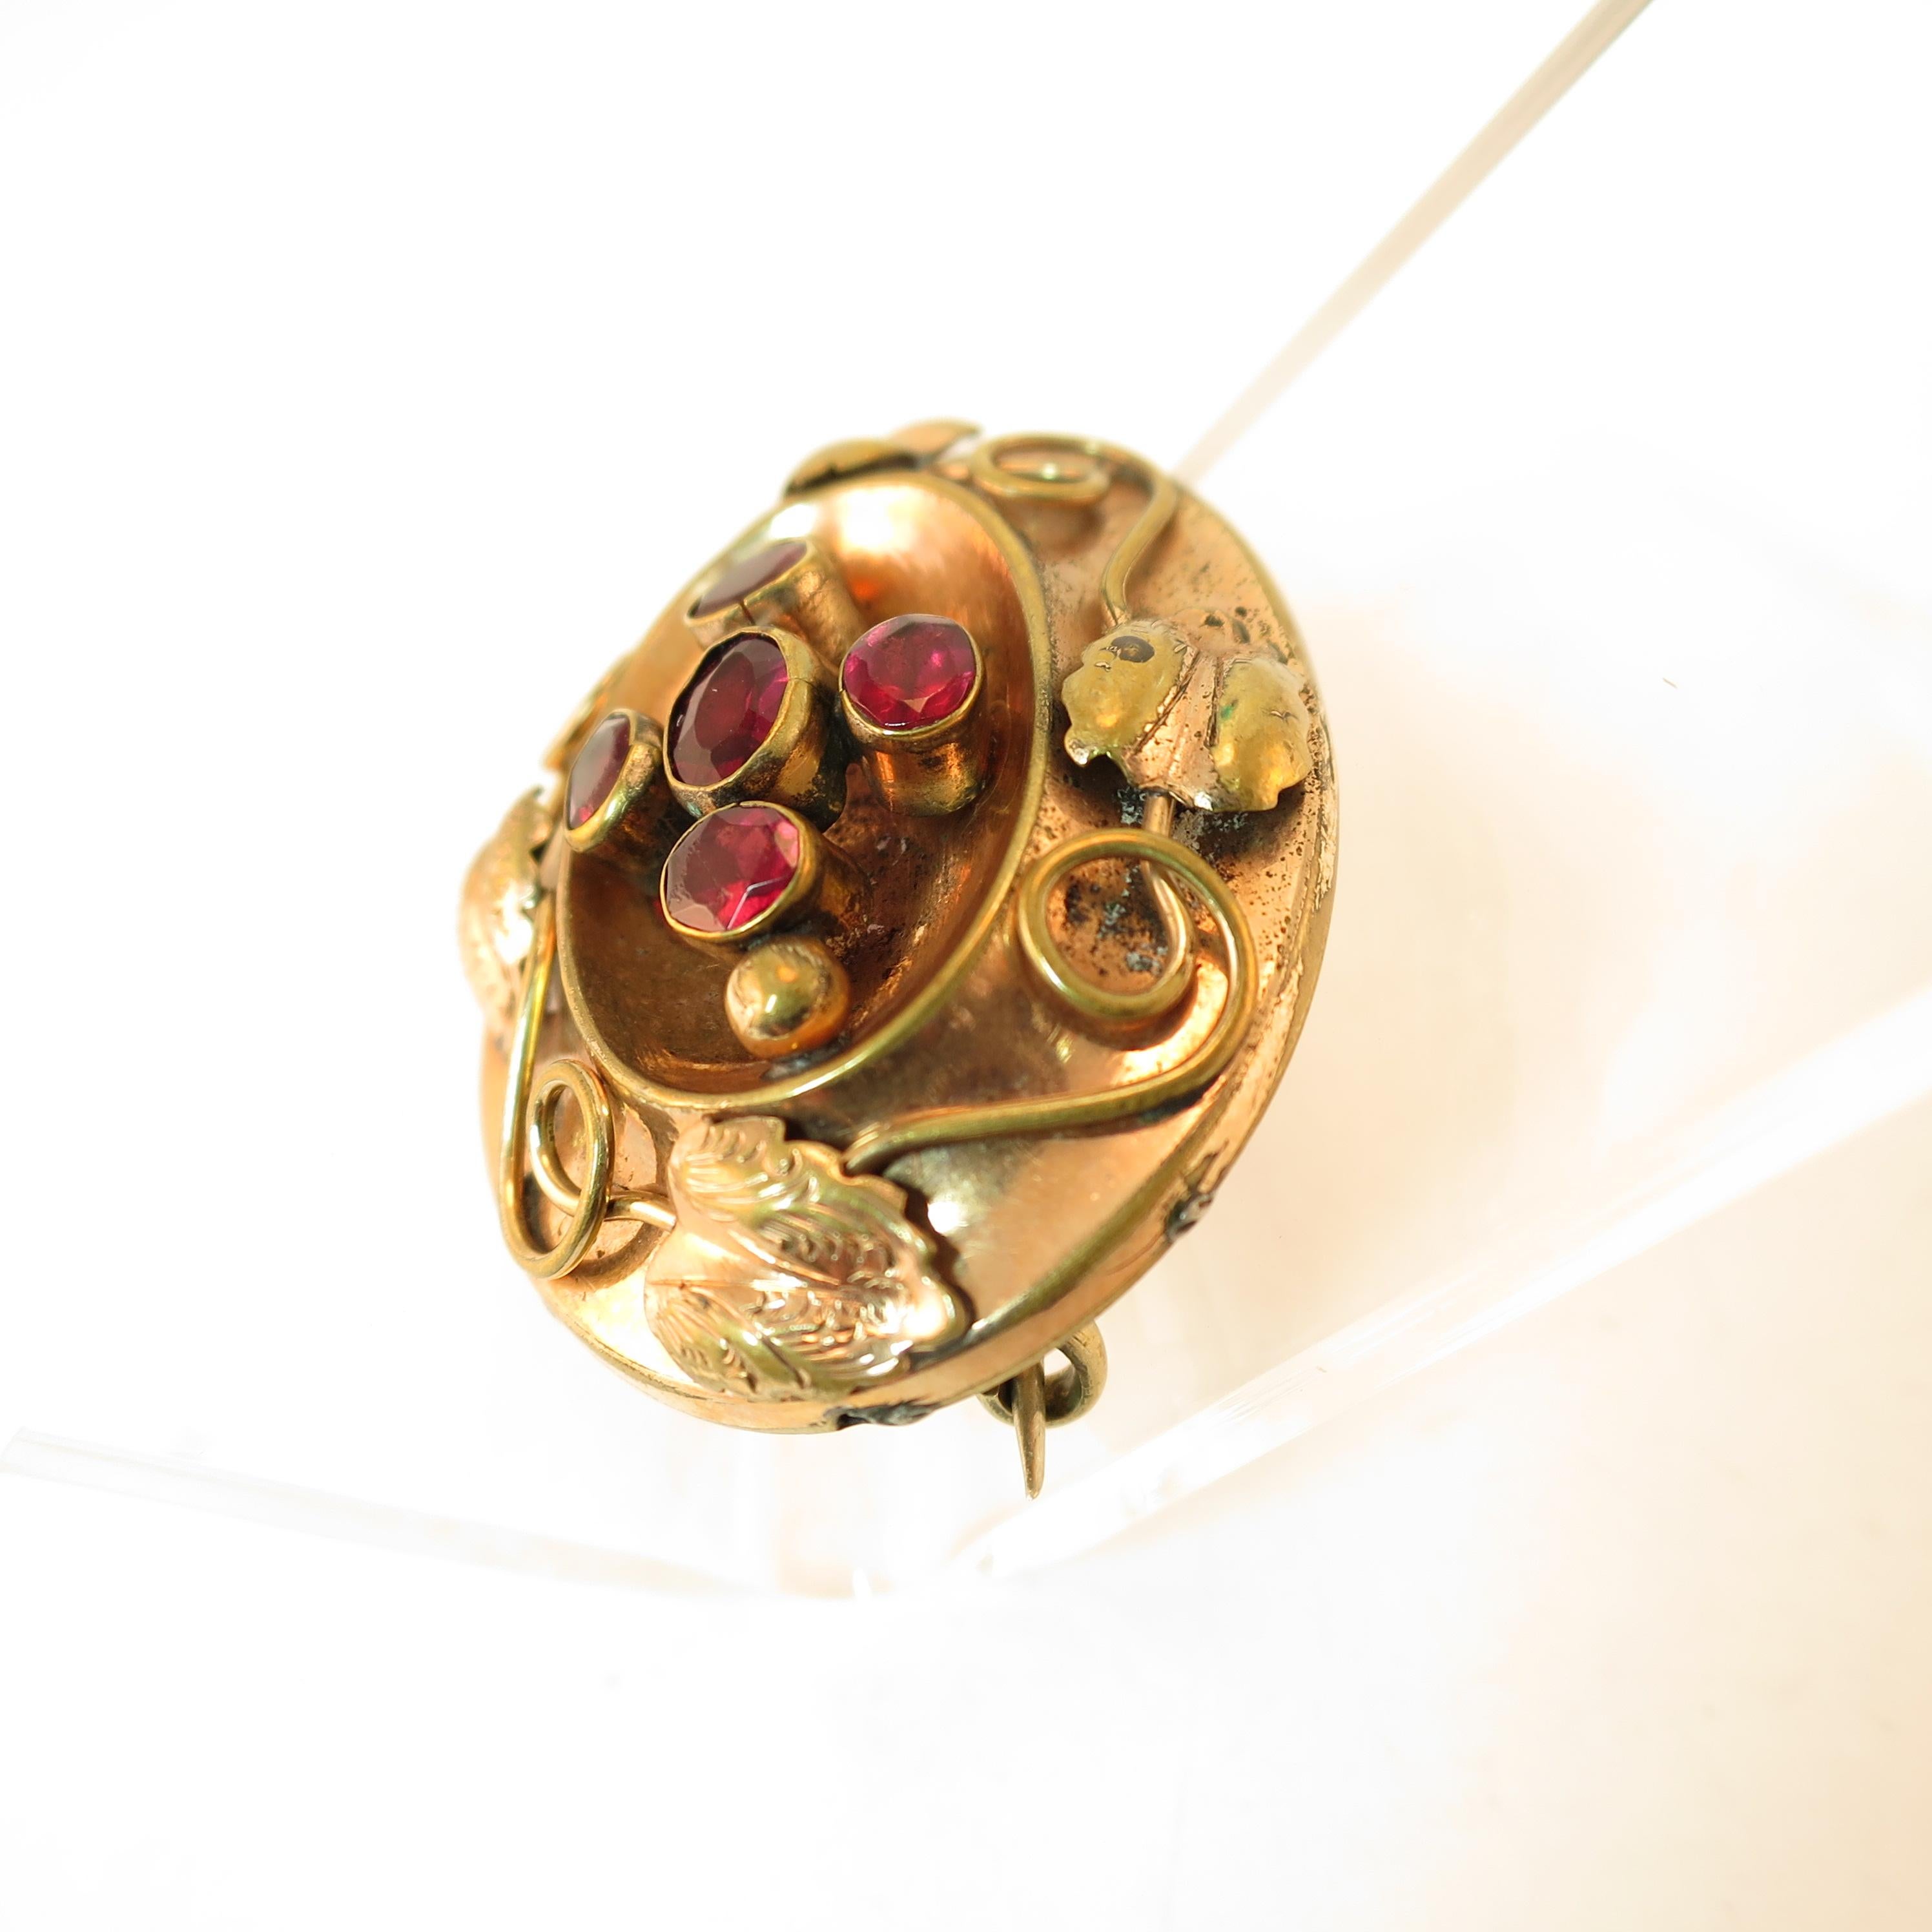 Victorian 10k Gold & Garnet Hollow-ware Brooch 1860s In Good Condition For Sale In Burbank, CA